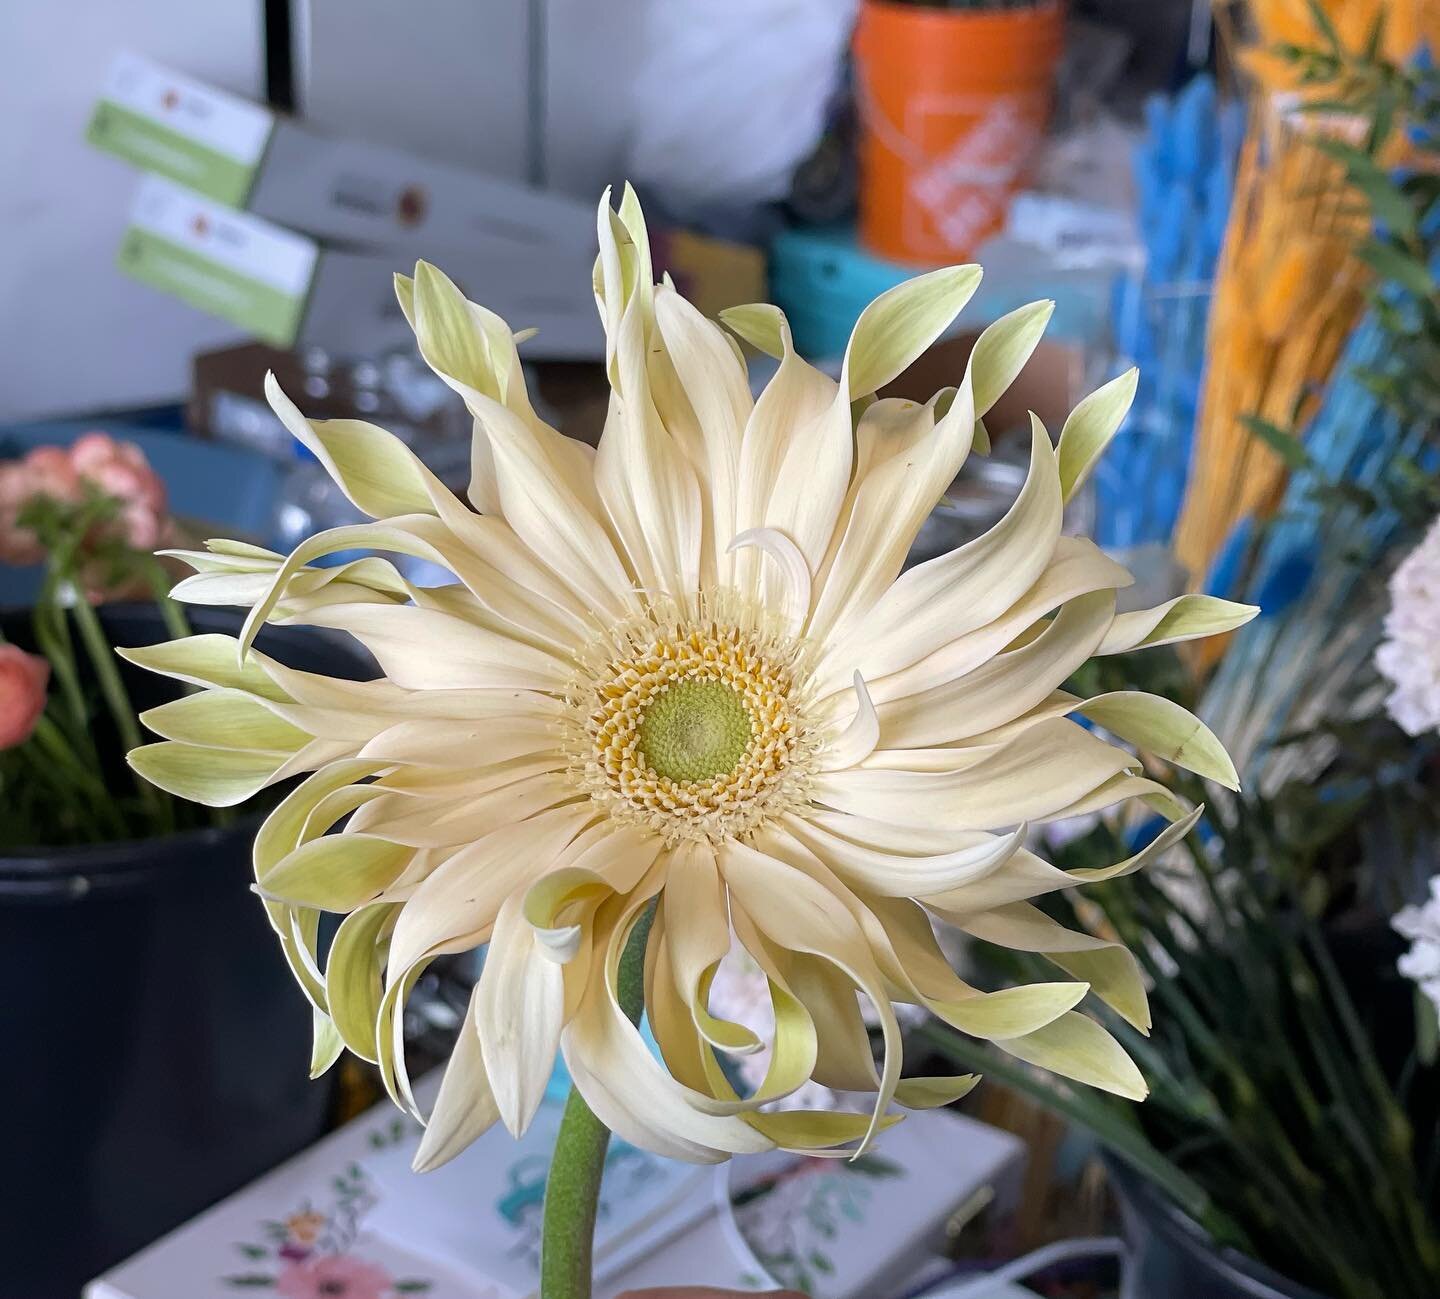 Happy Delivery Day from this Gerbera with Pasta Noodle Petals! 

It&rsquo;s Subscription Delivery Day, and we can&rsquo;t wait for you to see what we have in store for you this Month! 

#yegflowersubscription #yegflowers #yegflowershop  #yegshoplocal